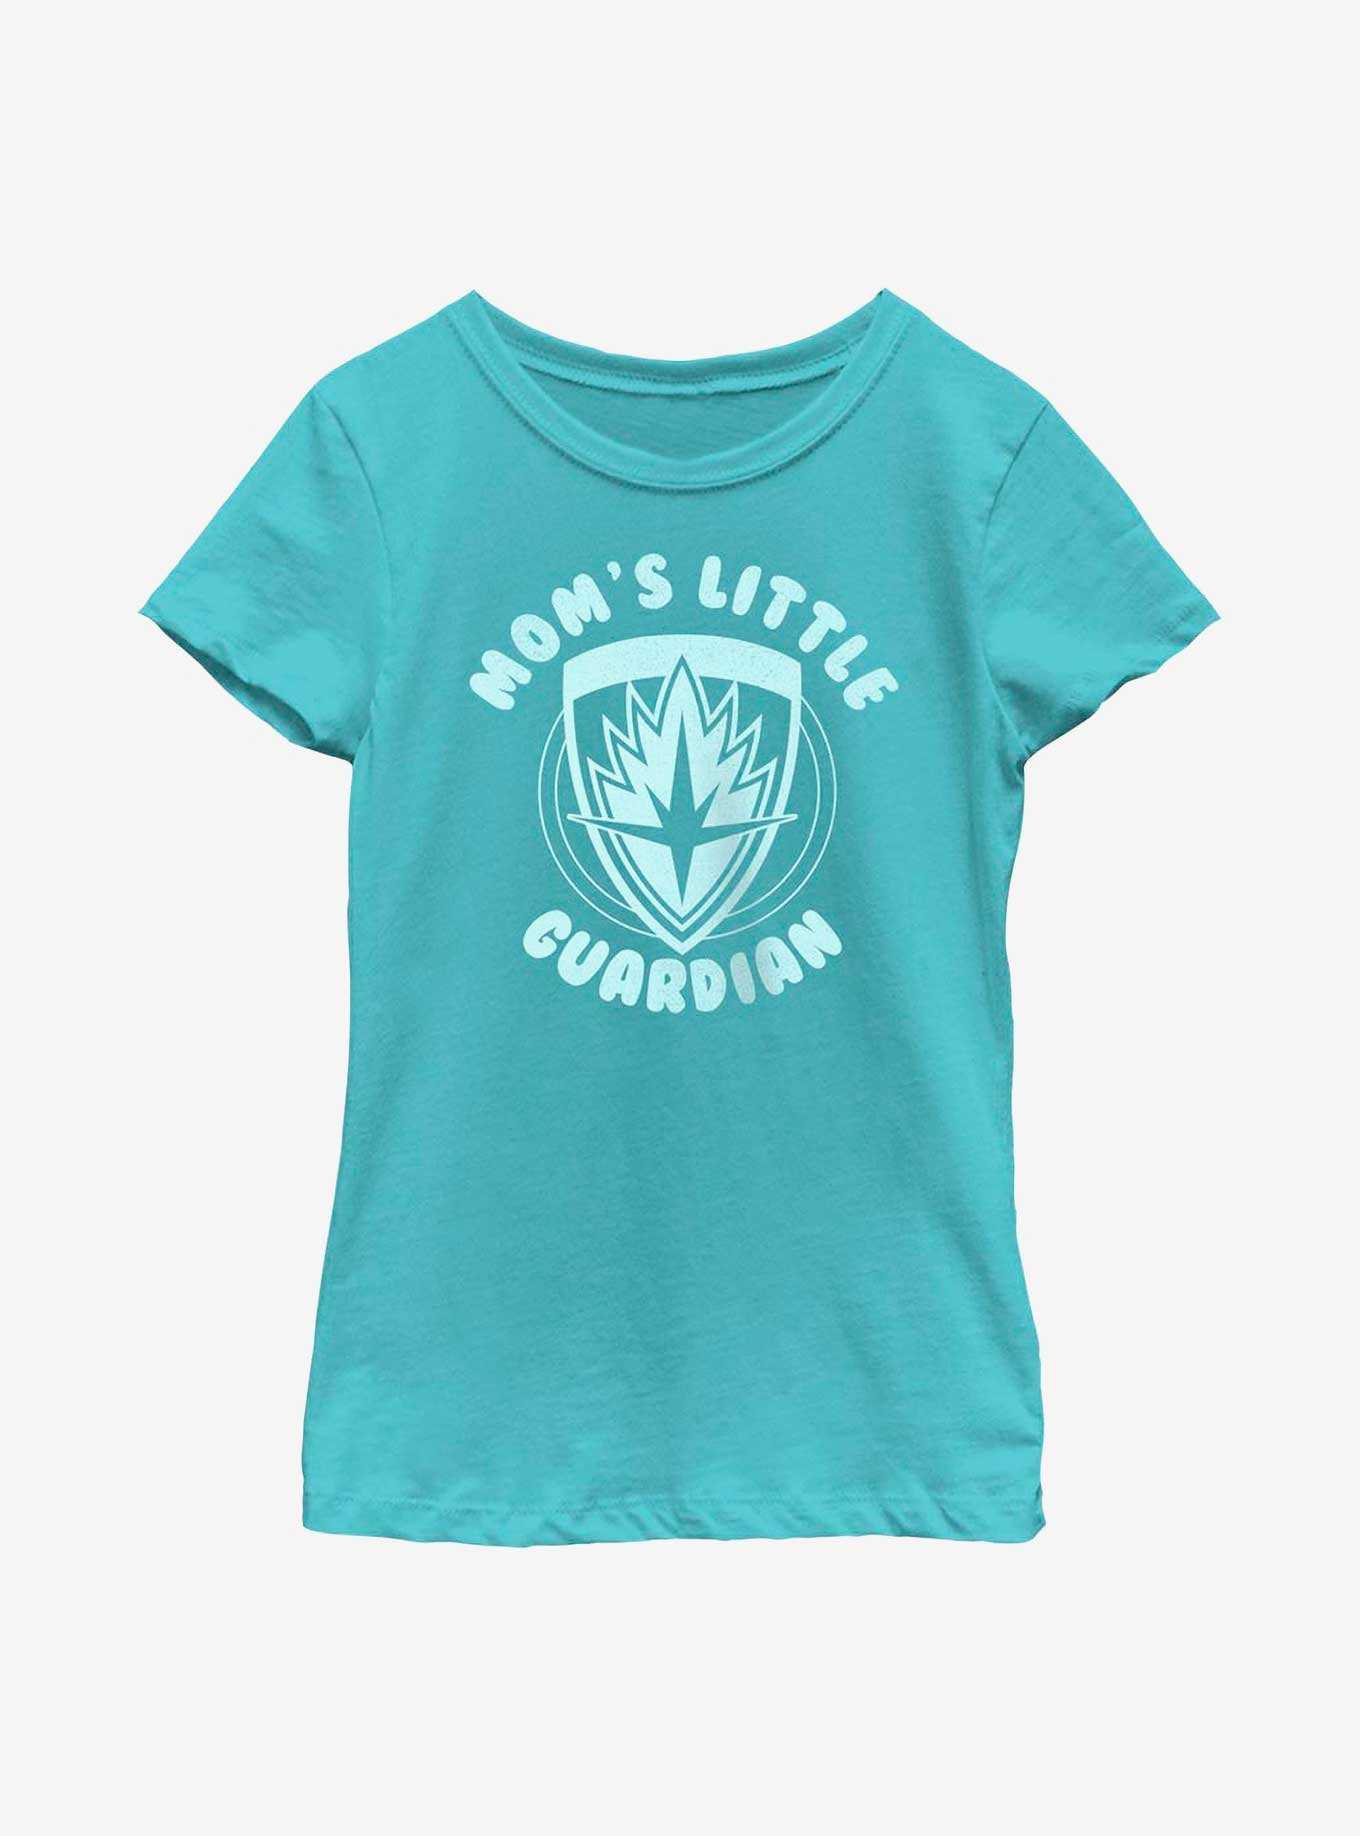 Marvel Guardians of the Galaxy Mom's Little Guardian Youth Girls T-Shirt, , hi-res